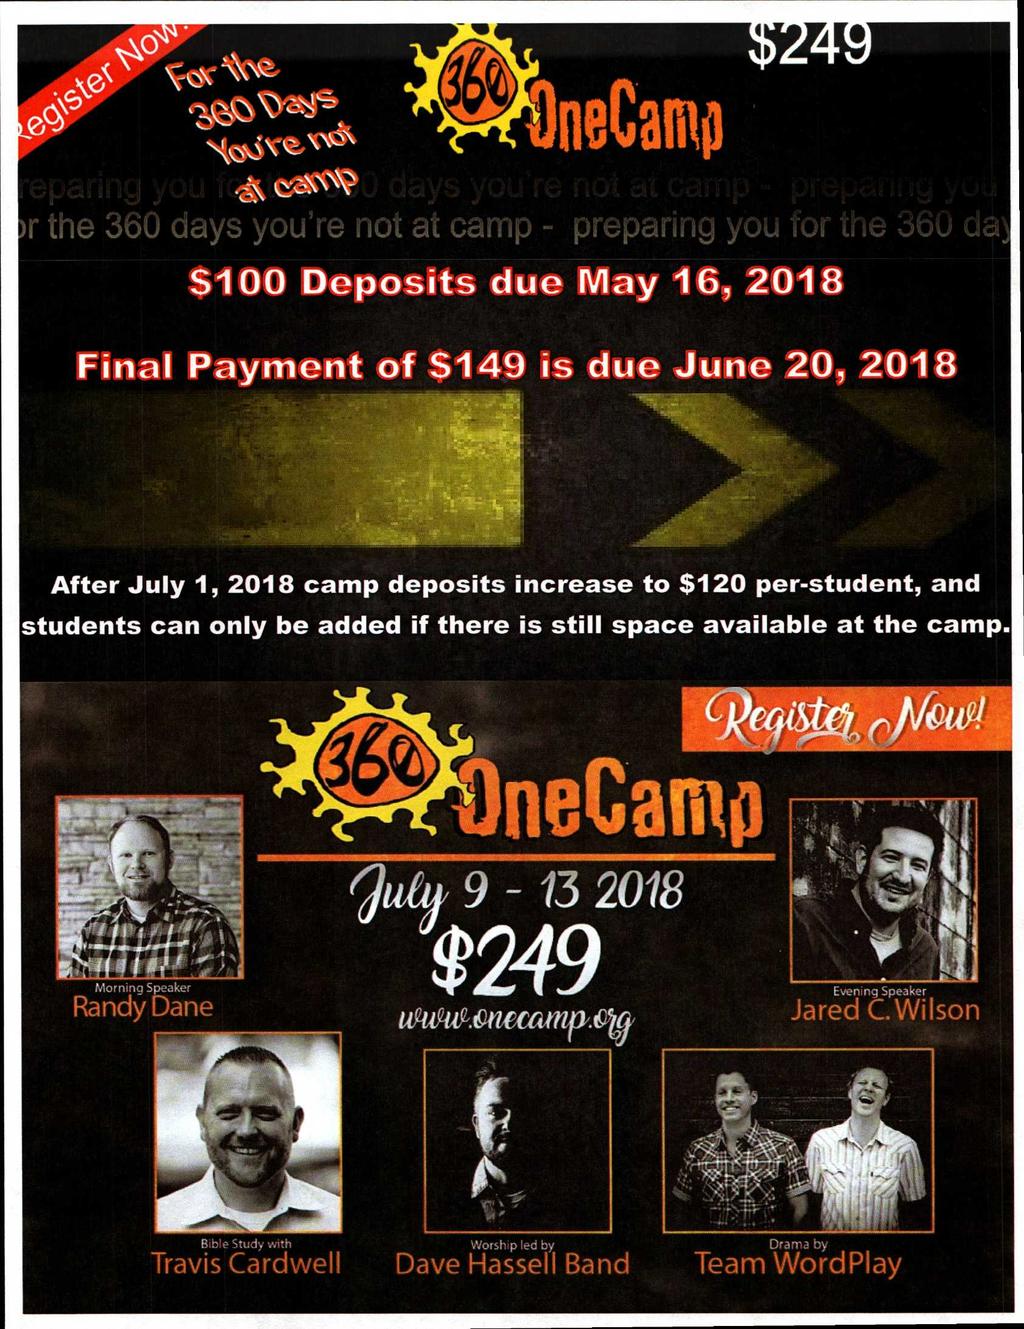 S100 Deposits due May 16, 2018 Final Payment of S149 is due June 20, 2018 After July 1, 2018 camp deposits increase to $120 per-student, and students can only be added if there is